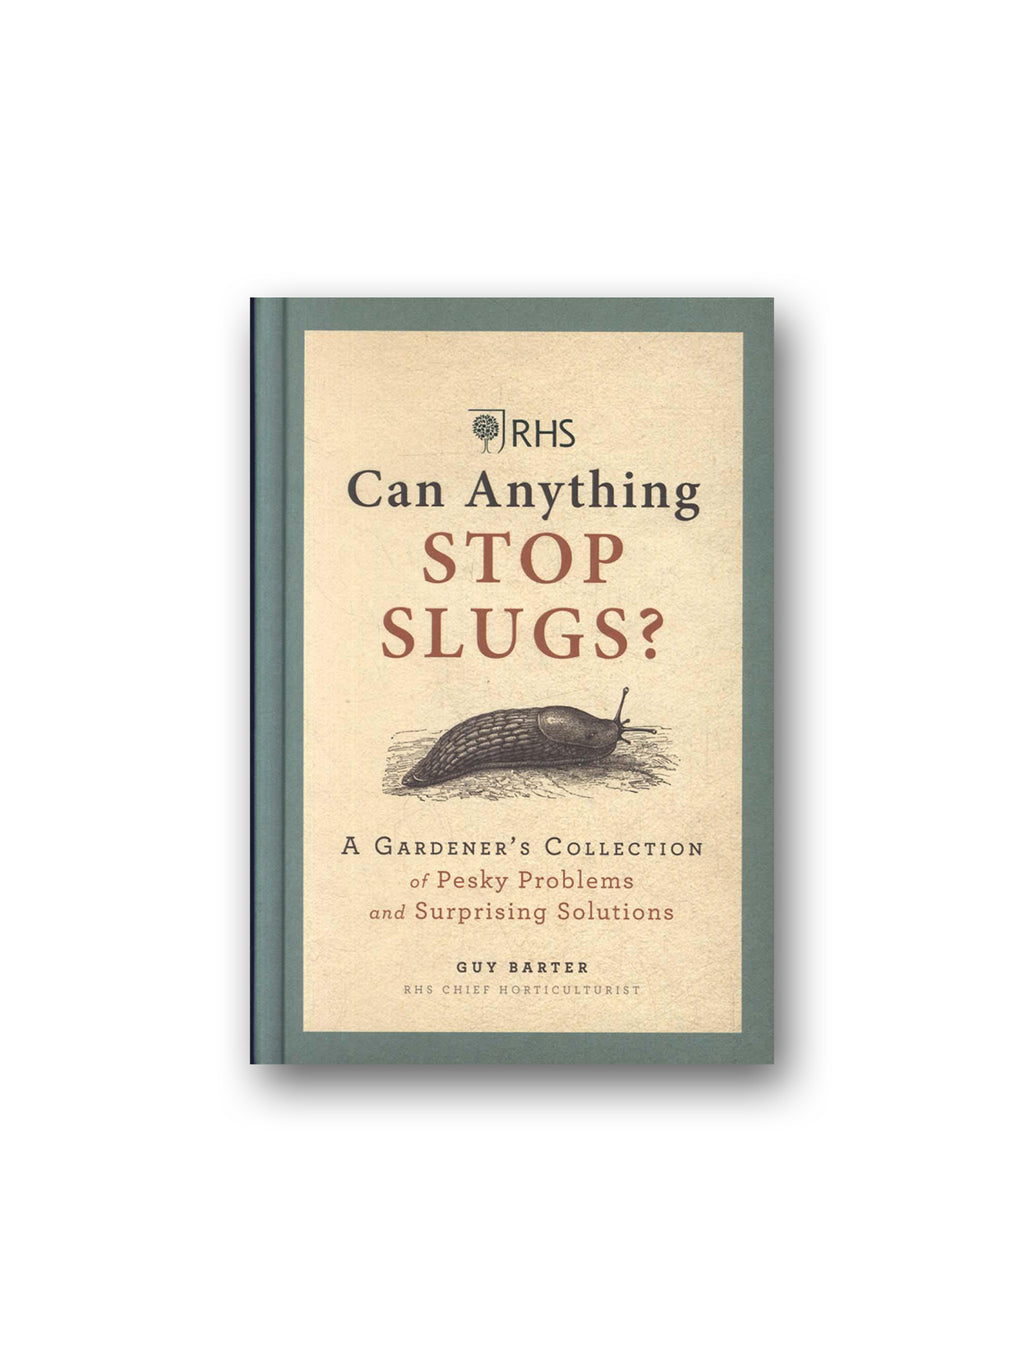 RHS Can Anything Stop Slugs? : A Gardener's Collection of Pesky Problems and Surprising Solutions